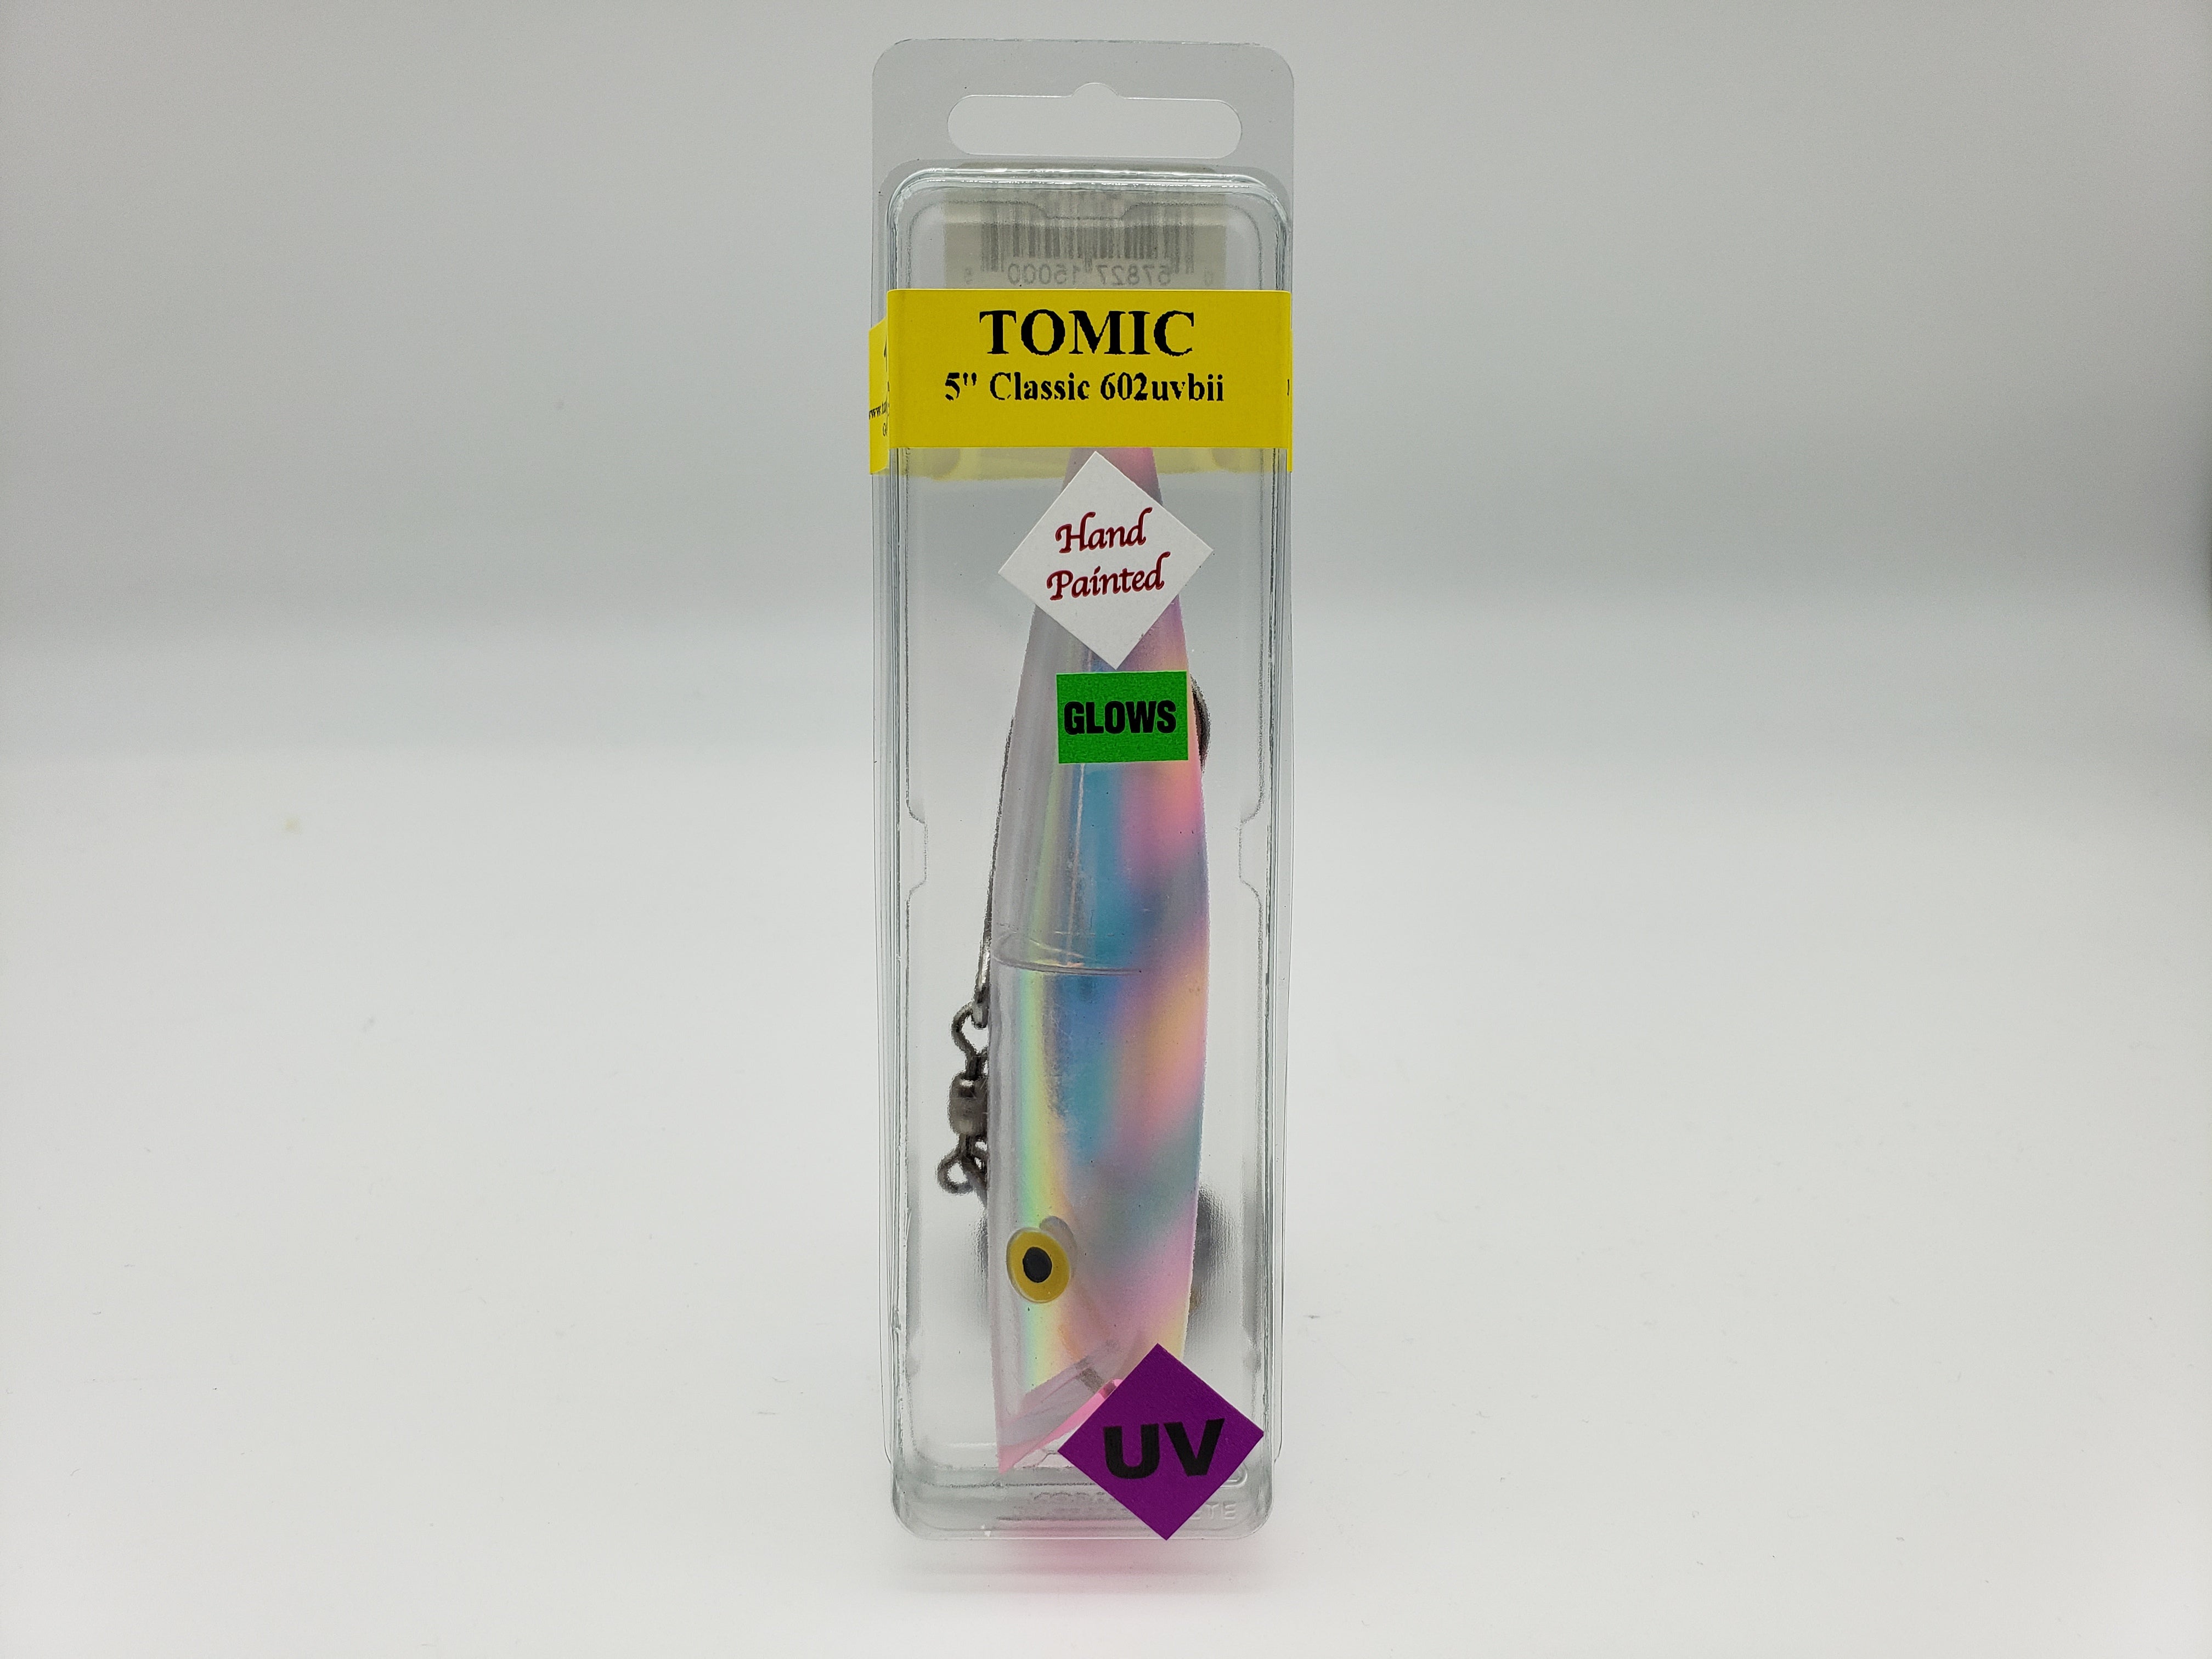 Find the best Tomic Plug 5 - Hand Painted - 645uv bii Glow on Sale